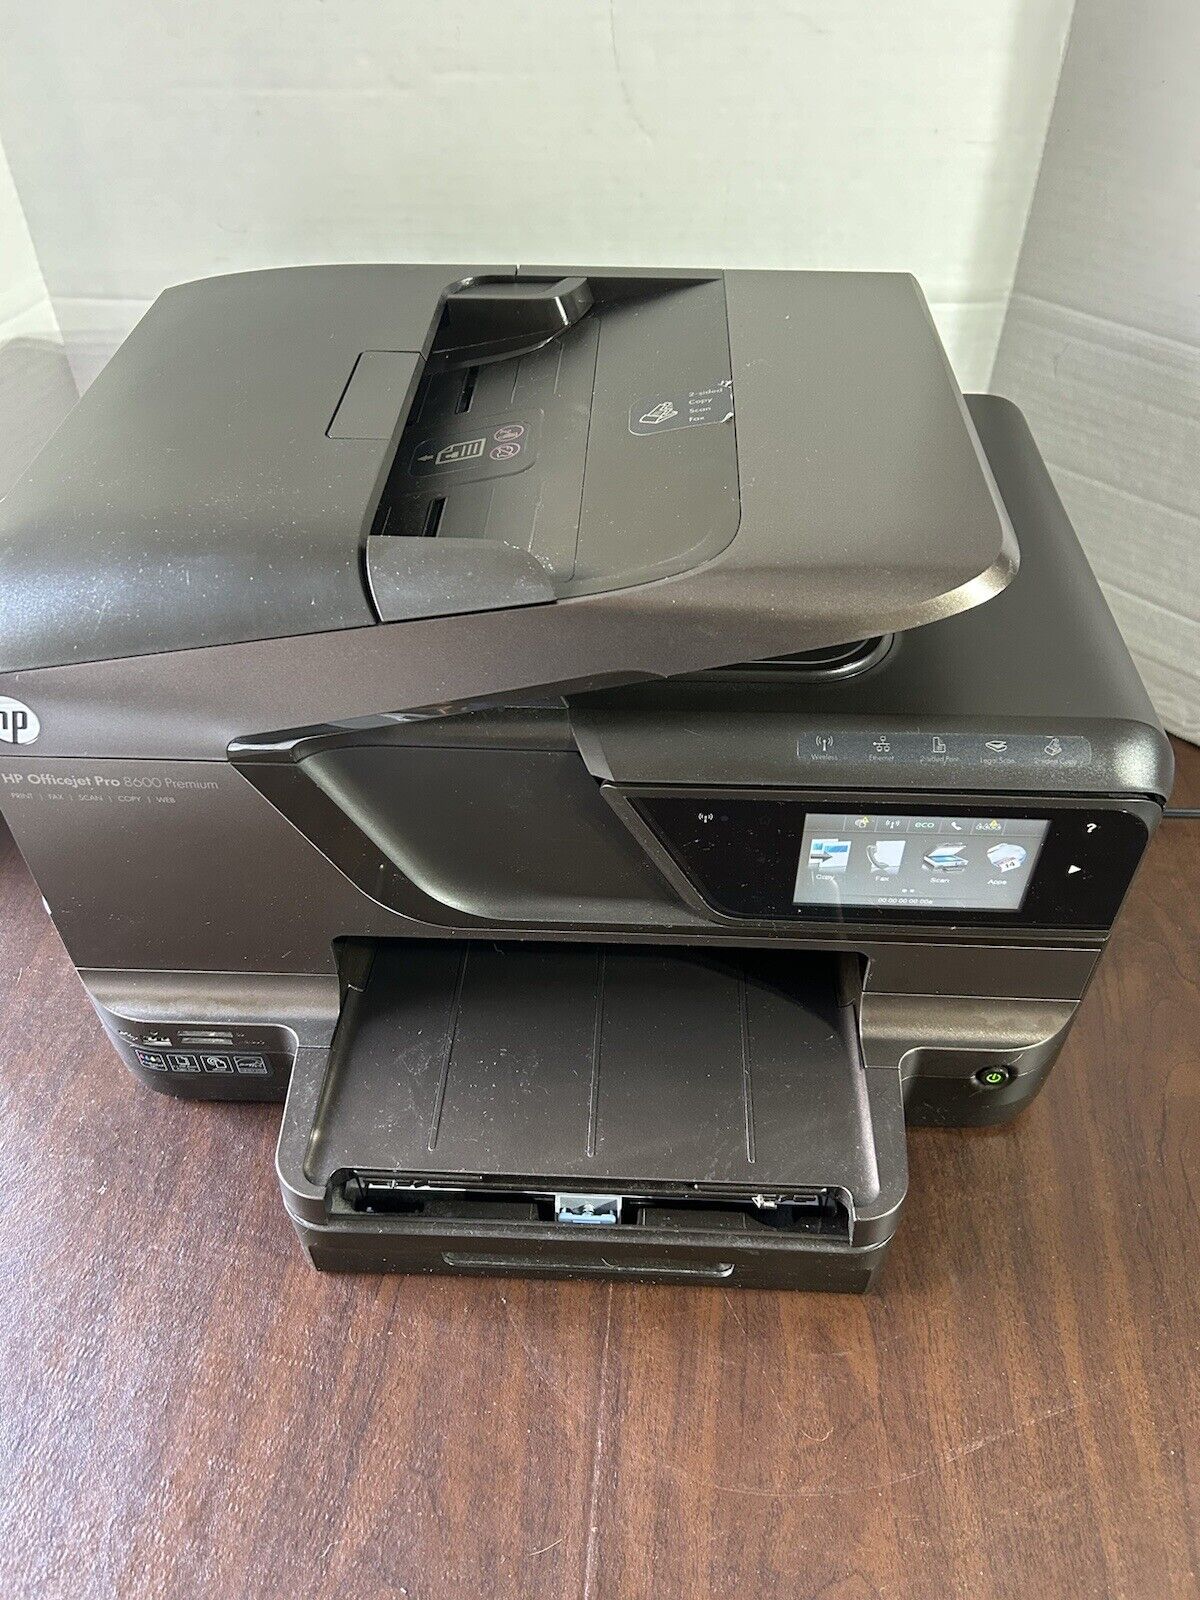 HP Officejet Pro 8600 Premium All-In-One Inkjet Printer - New Ink.  Tested Brown